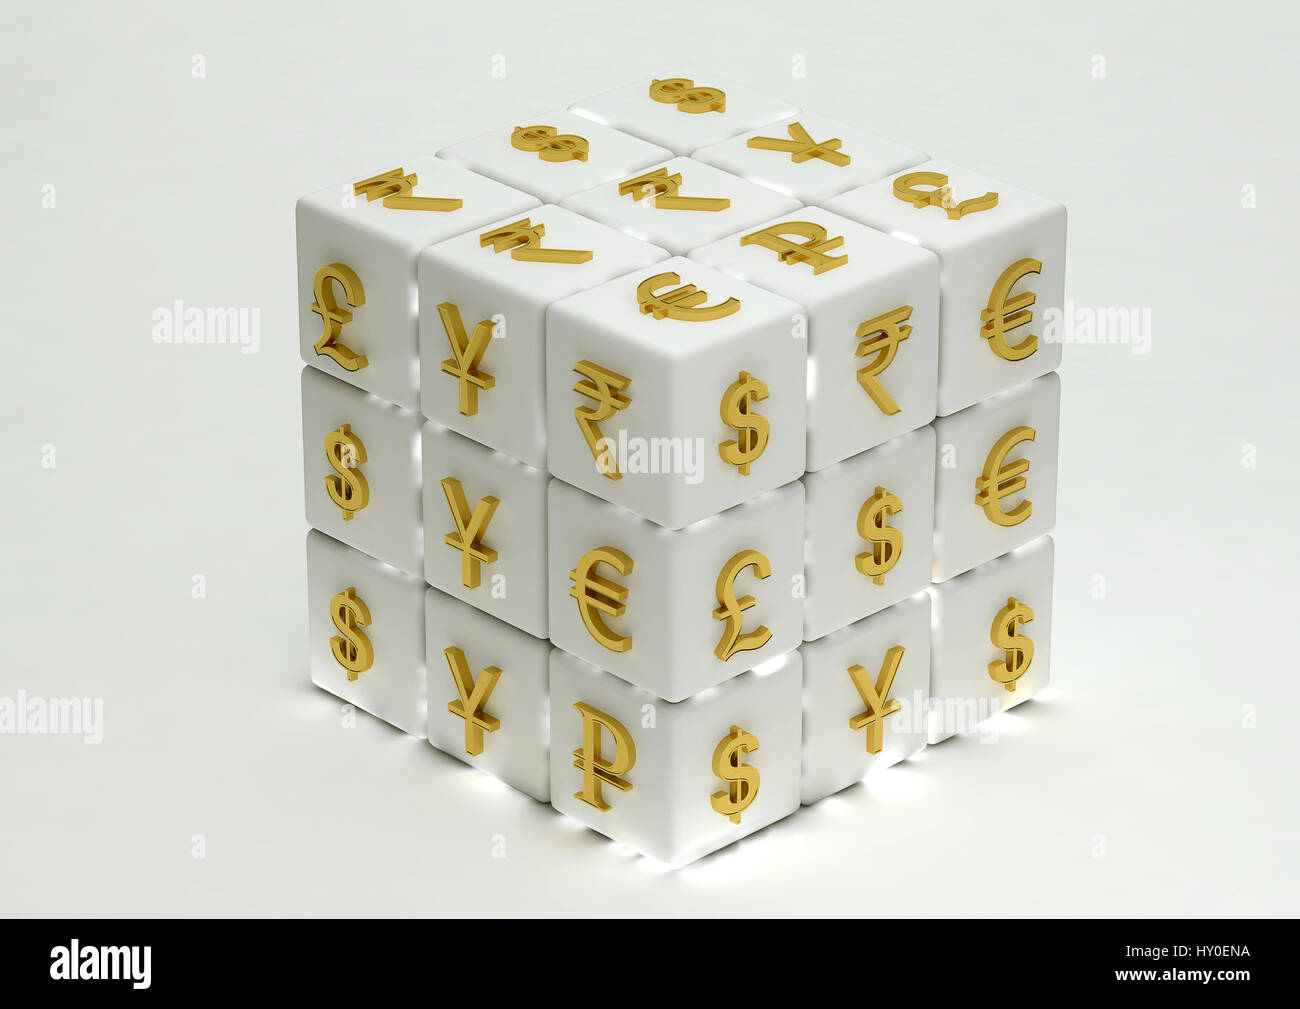 Cube of International currency symbols Stock Photo